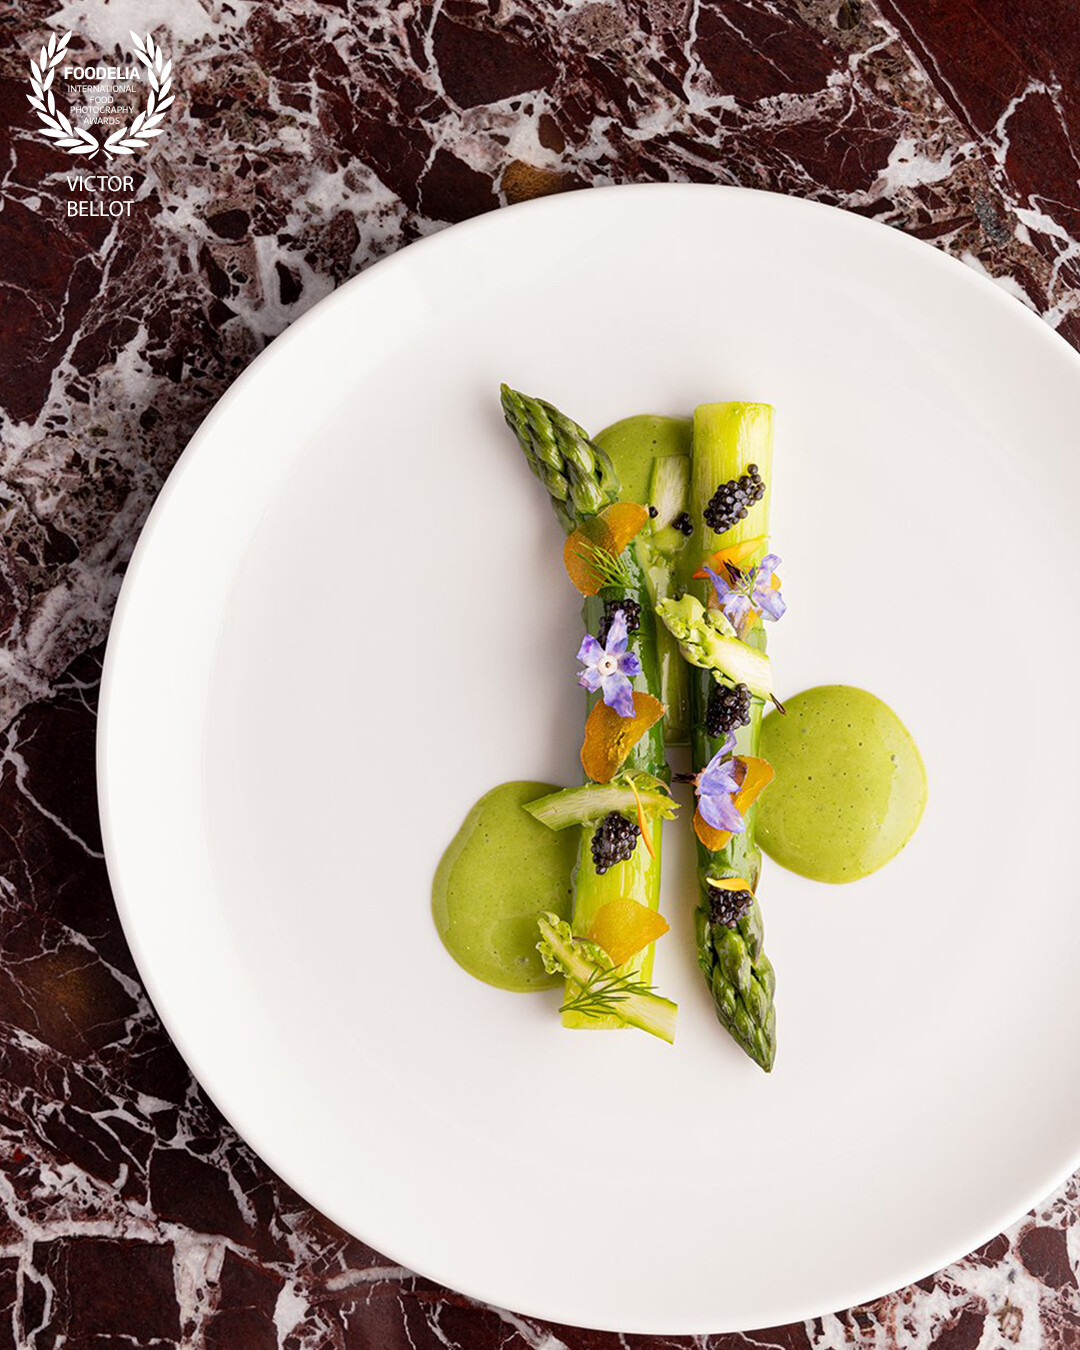 Asparagus, bottarge, caviar and flower imagined by chef Jimmy Elisabeth for the restaurant Voyage Samaritaine in Paris.